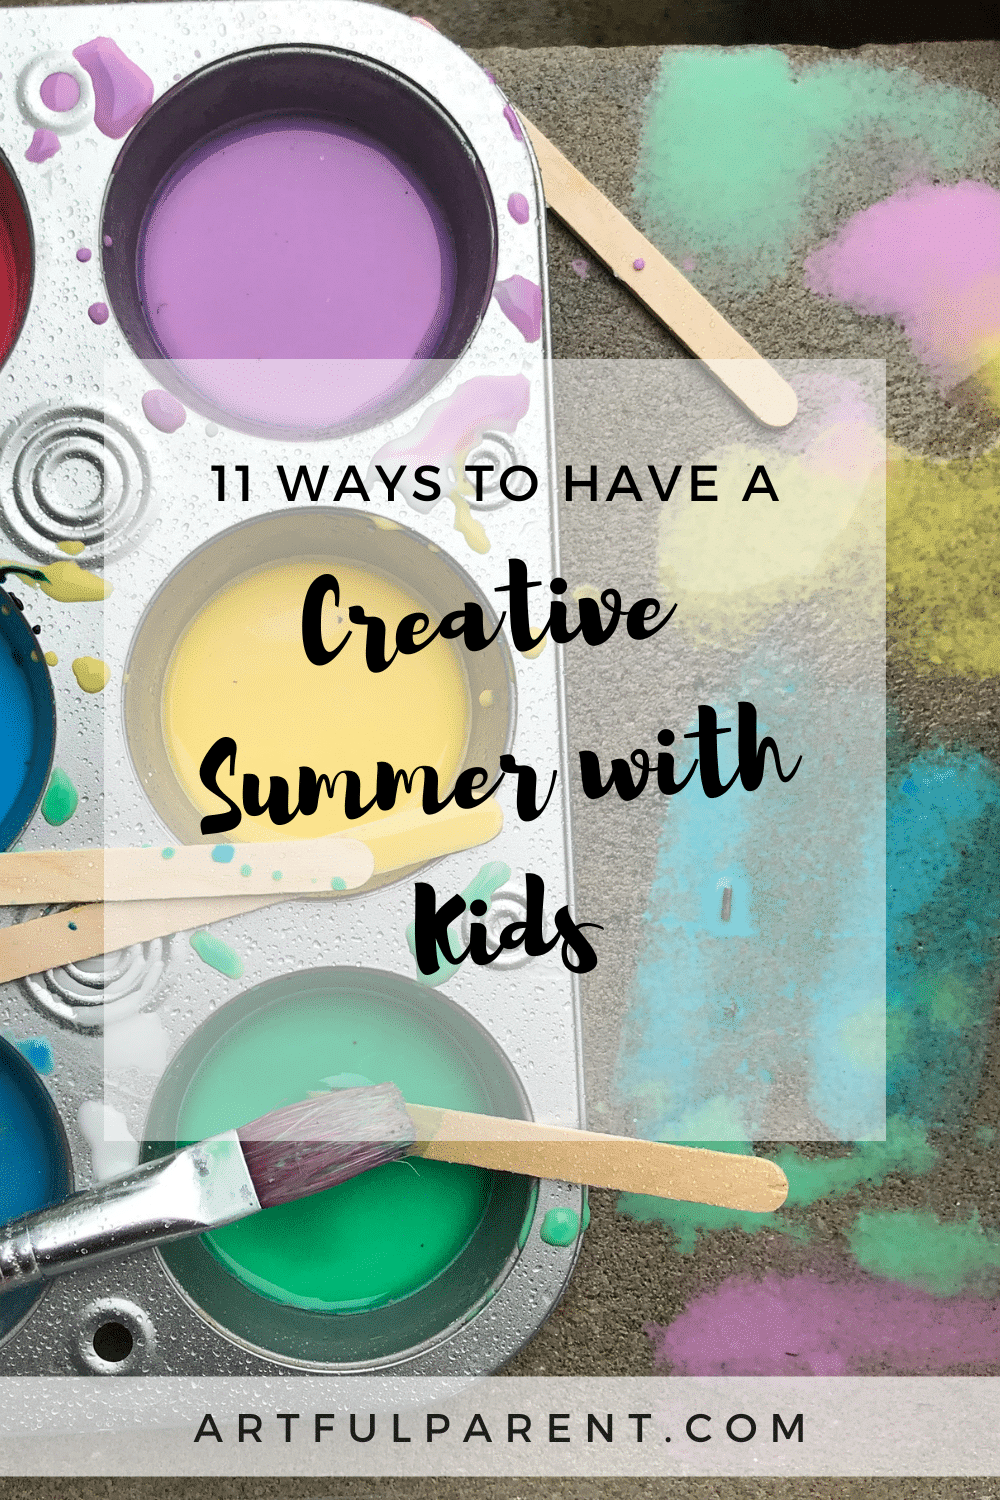 11 Ways to Have a Creative Summer with Kids